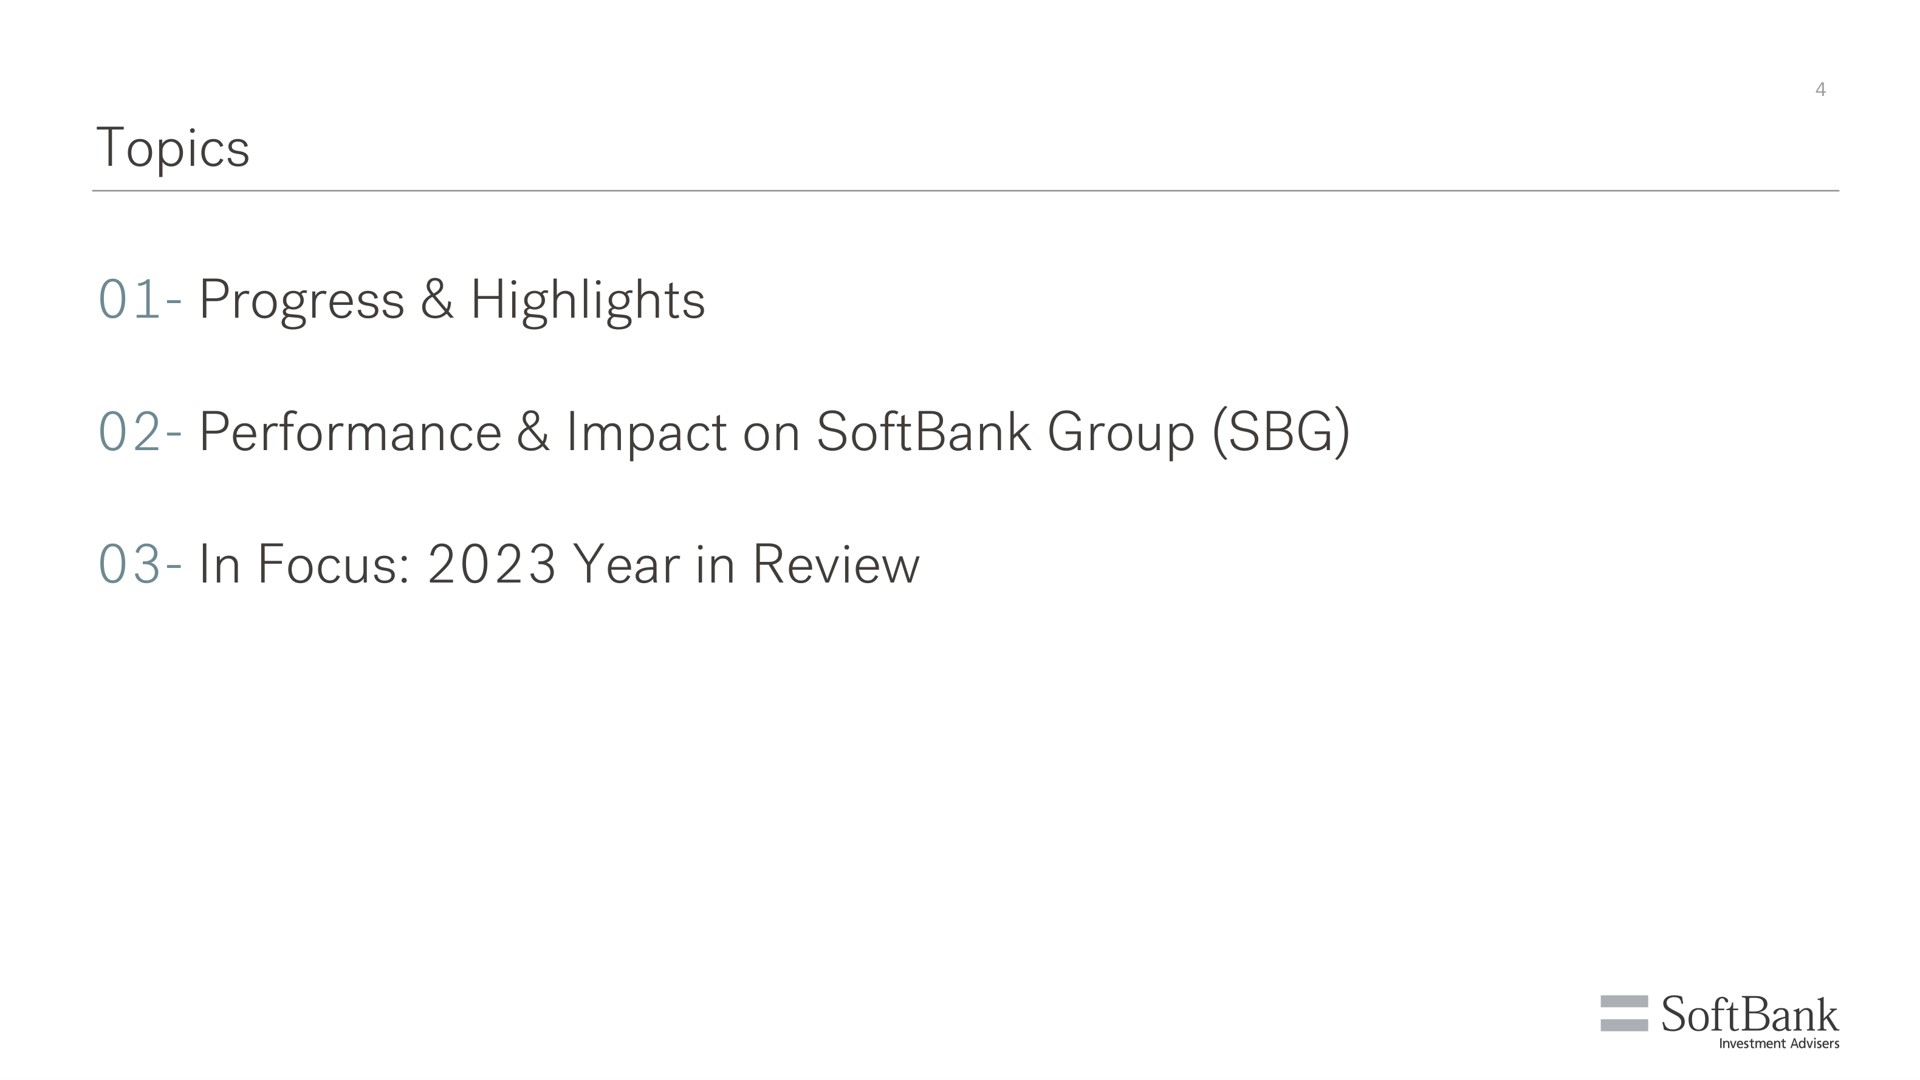 topics progress highlights performance impact on group in focus year in review | SoftBank